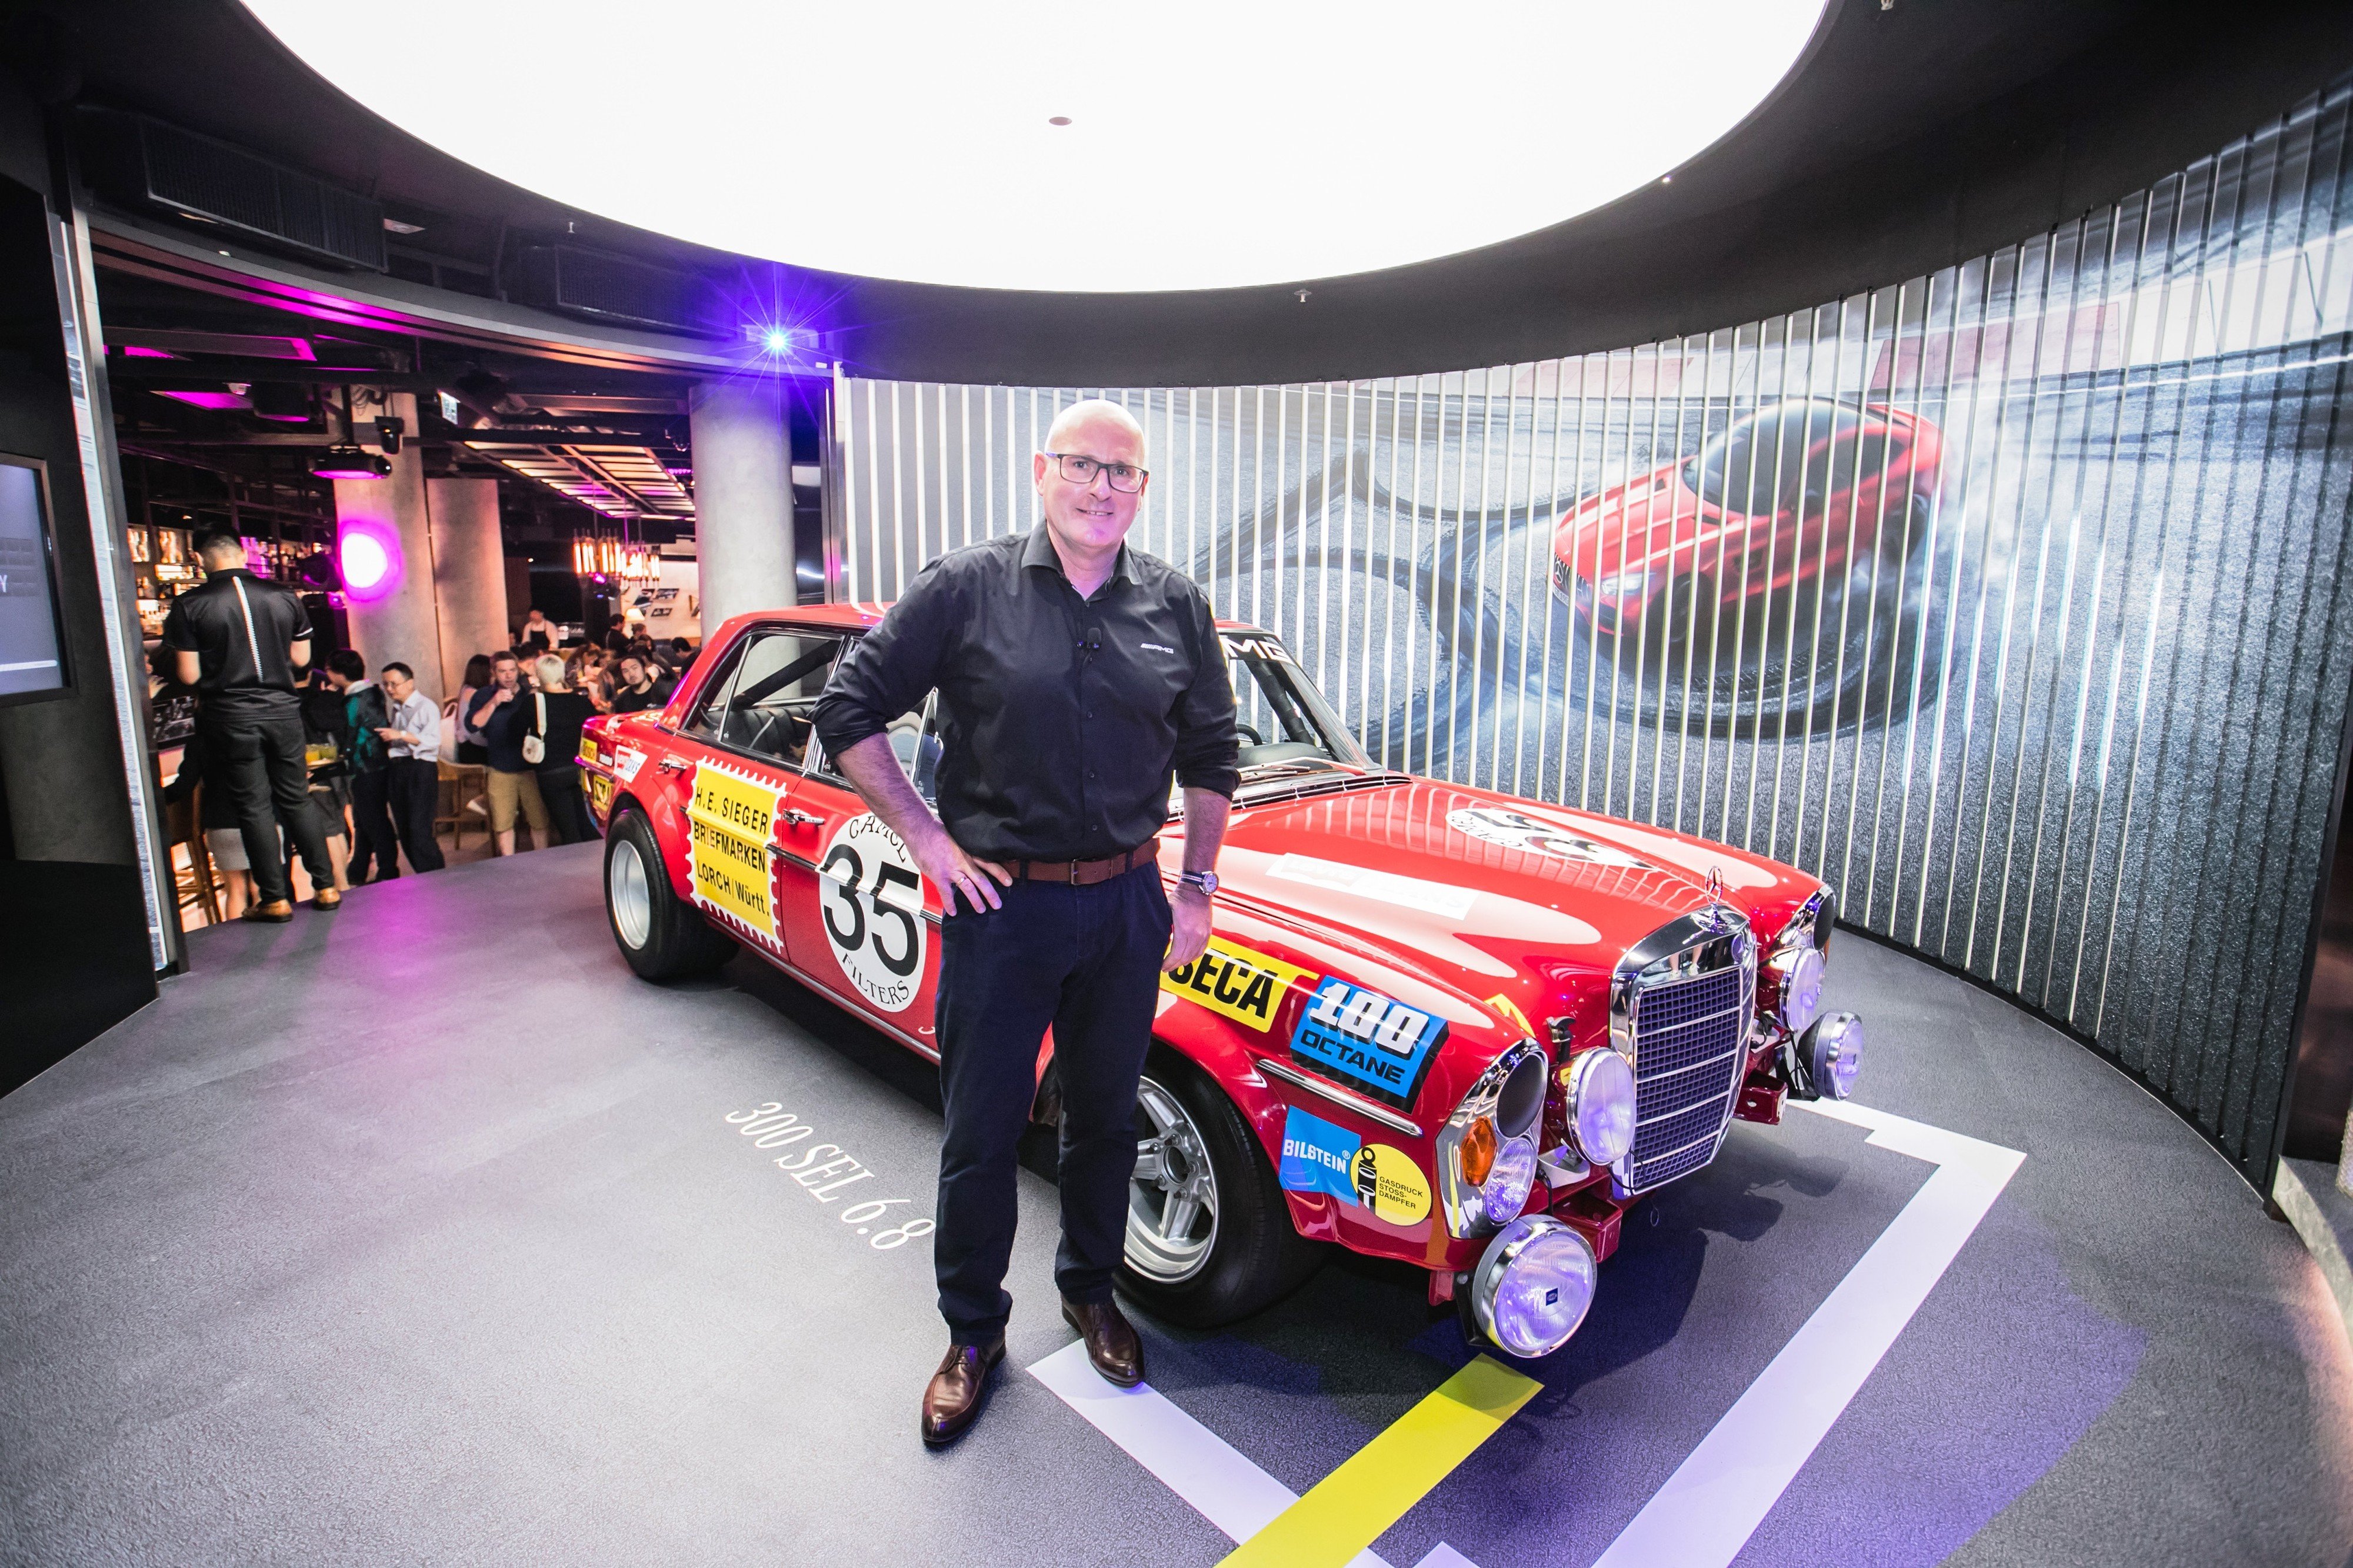 Mercedes-AMG product manager Joerg Letzel with the 1971 AMG 300 SEL 6.8 'Red Giant' at Mercedes Me, Central. Photo: Handout